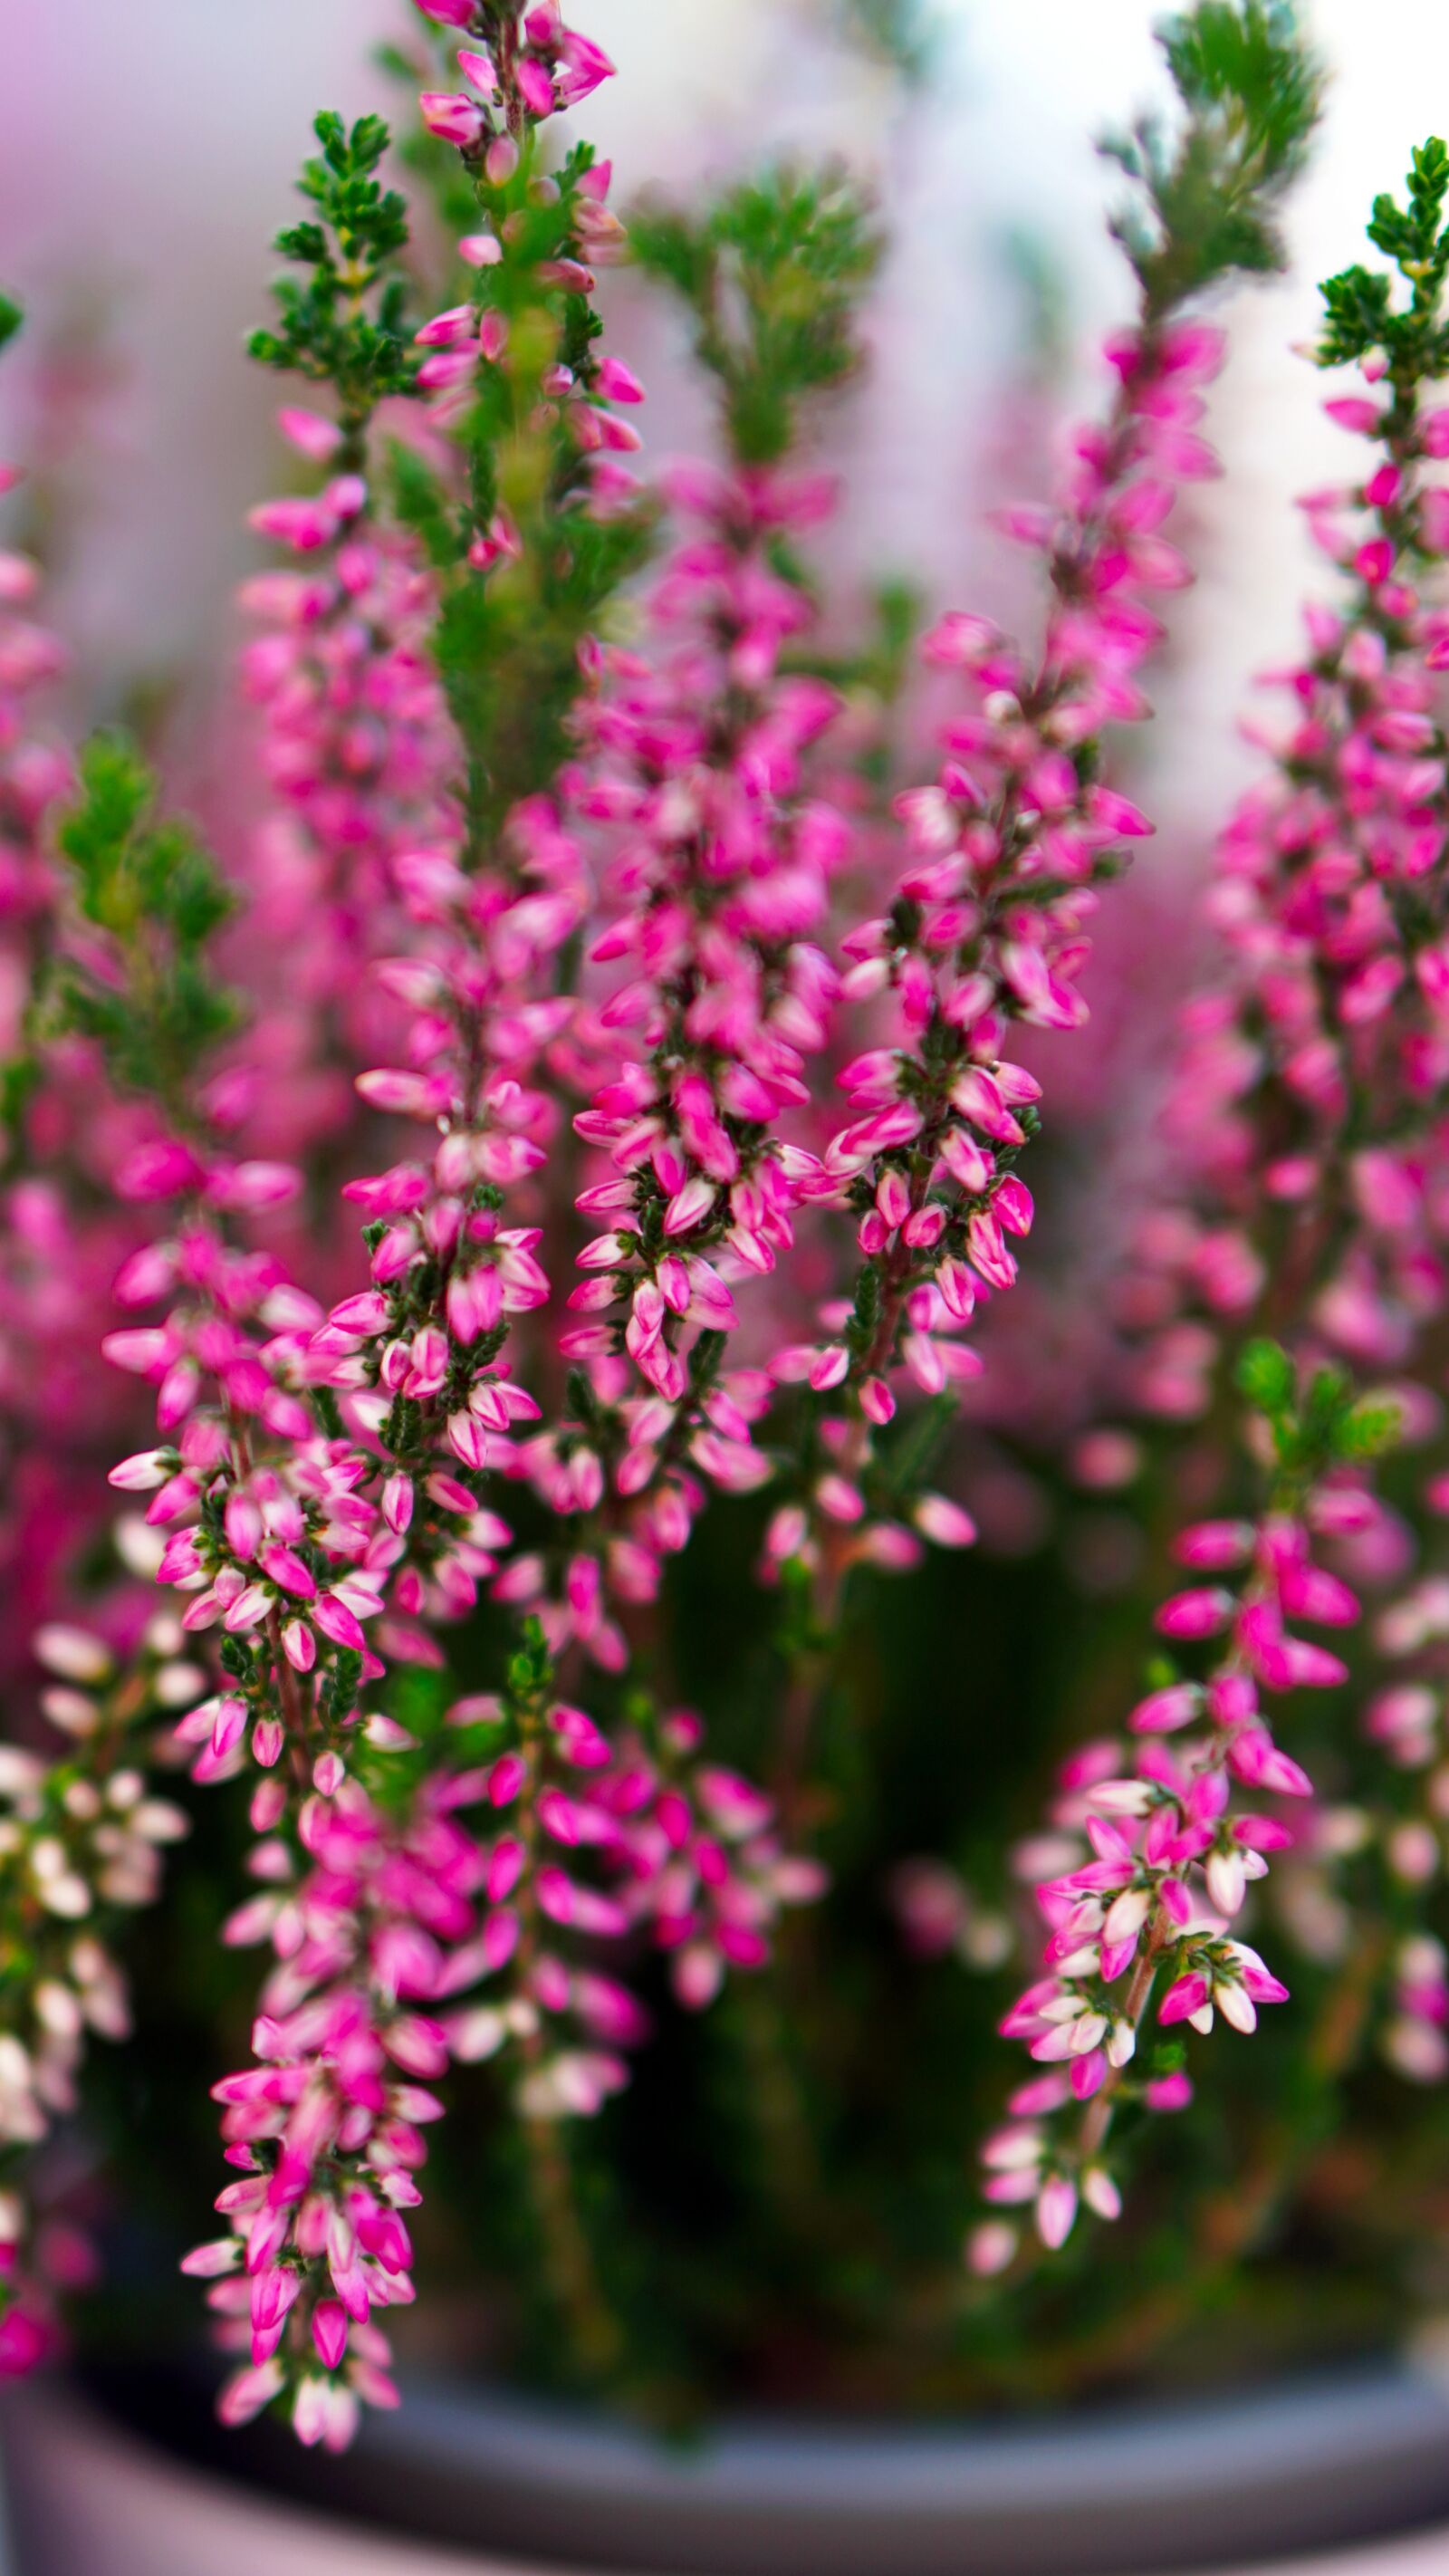 Sony a6400 + E 50mm F1.8 OSS sample photo. Flowers, heather flowers, bloom photography